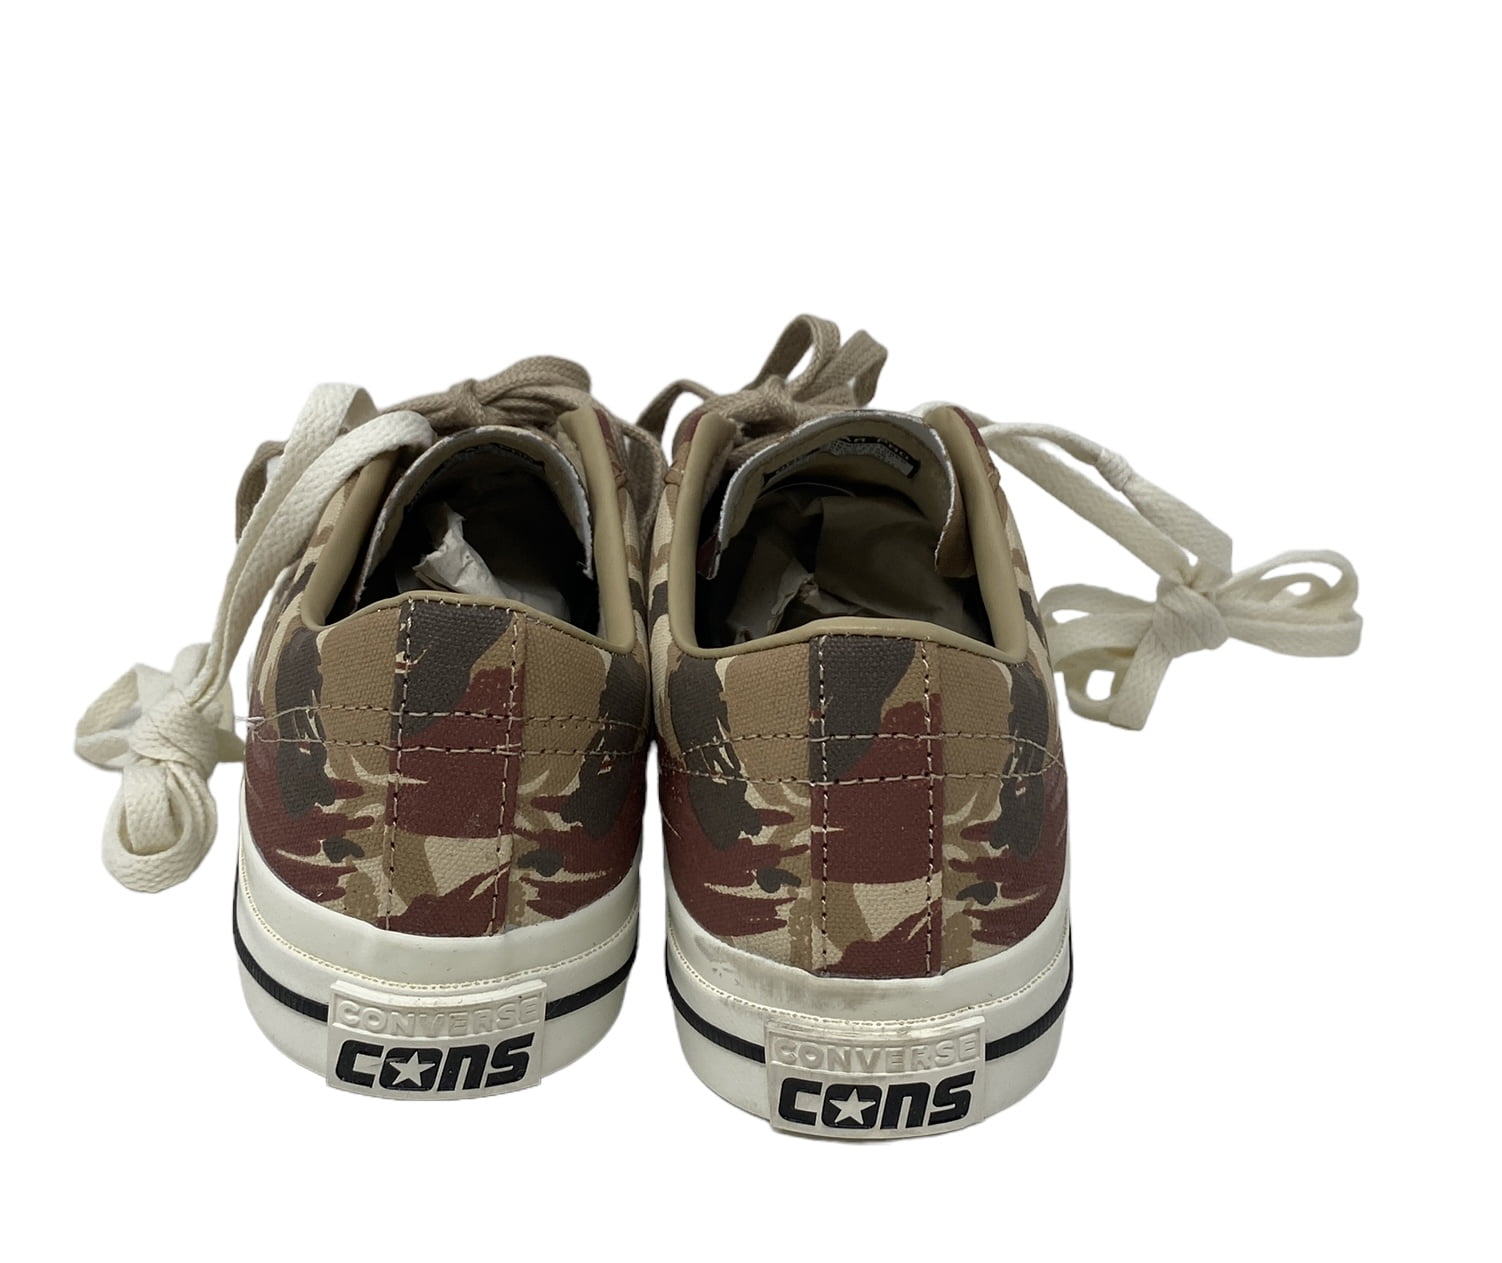 Stylish Converse Chuck Taylor All Star Camo Rubber Sneakers